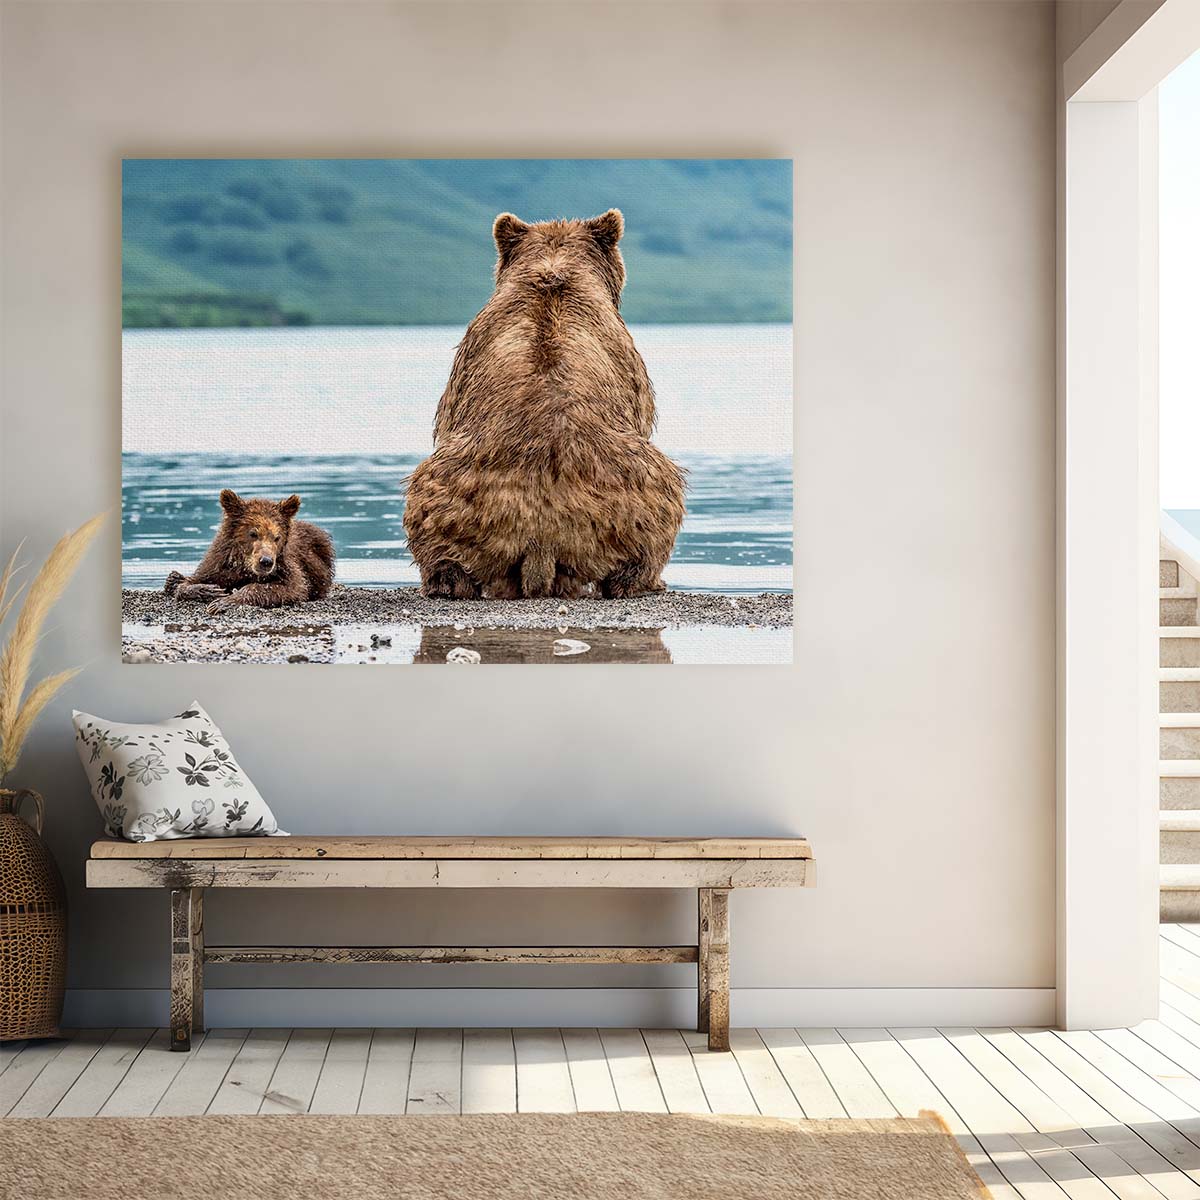 Kamchatka Bear Cubs Lakeside Fun Wall Art by Luxuriance Designs. Made in USA.